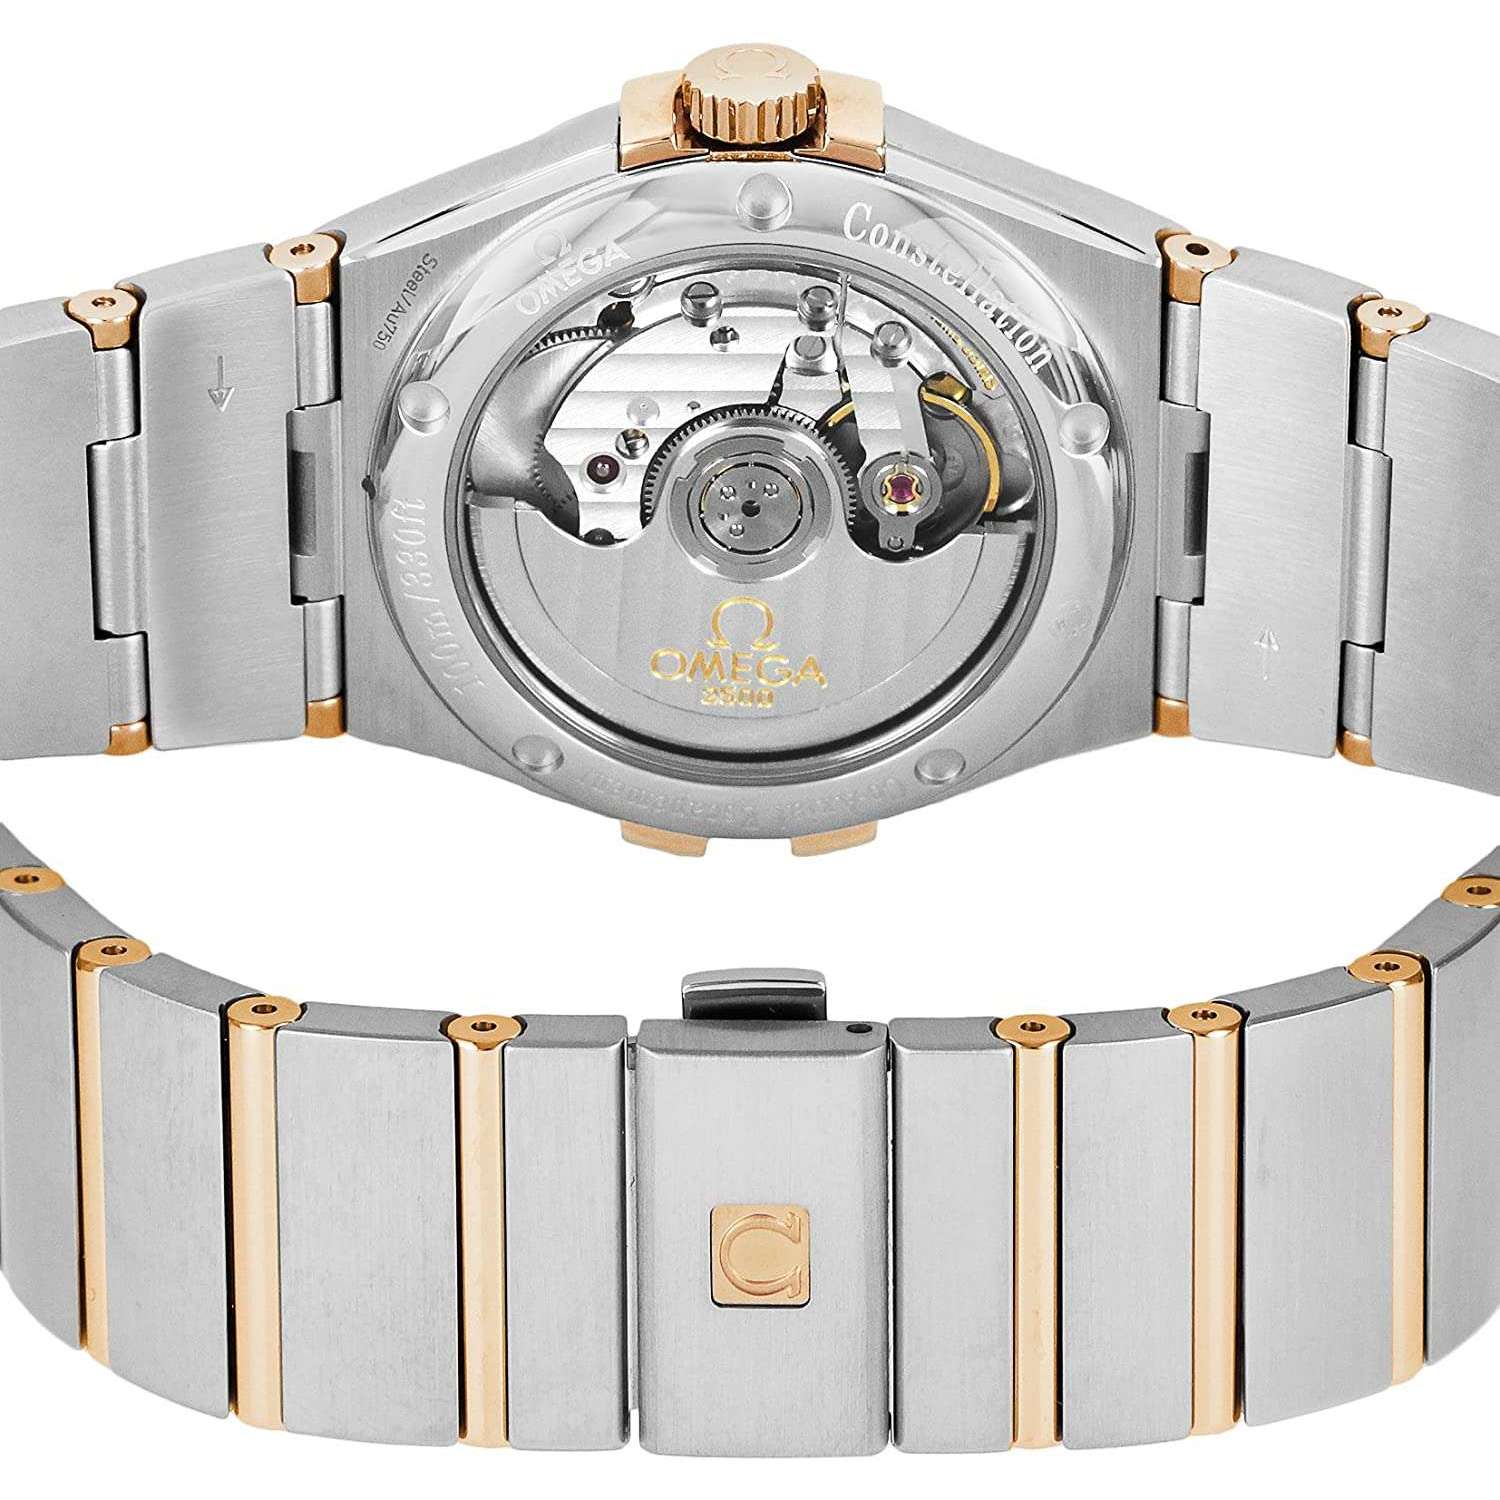 ROOK JAPAN:OMEGA CONSTELLATION CO-AXIAL CHRONOMETER 35 MM MEN WATCH 123.20.35.20.02.001,Luxury Watch,Omega